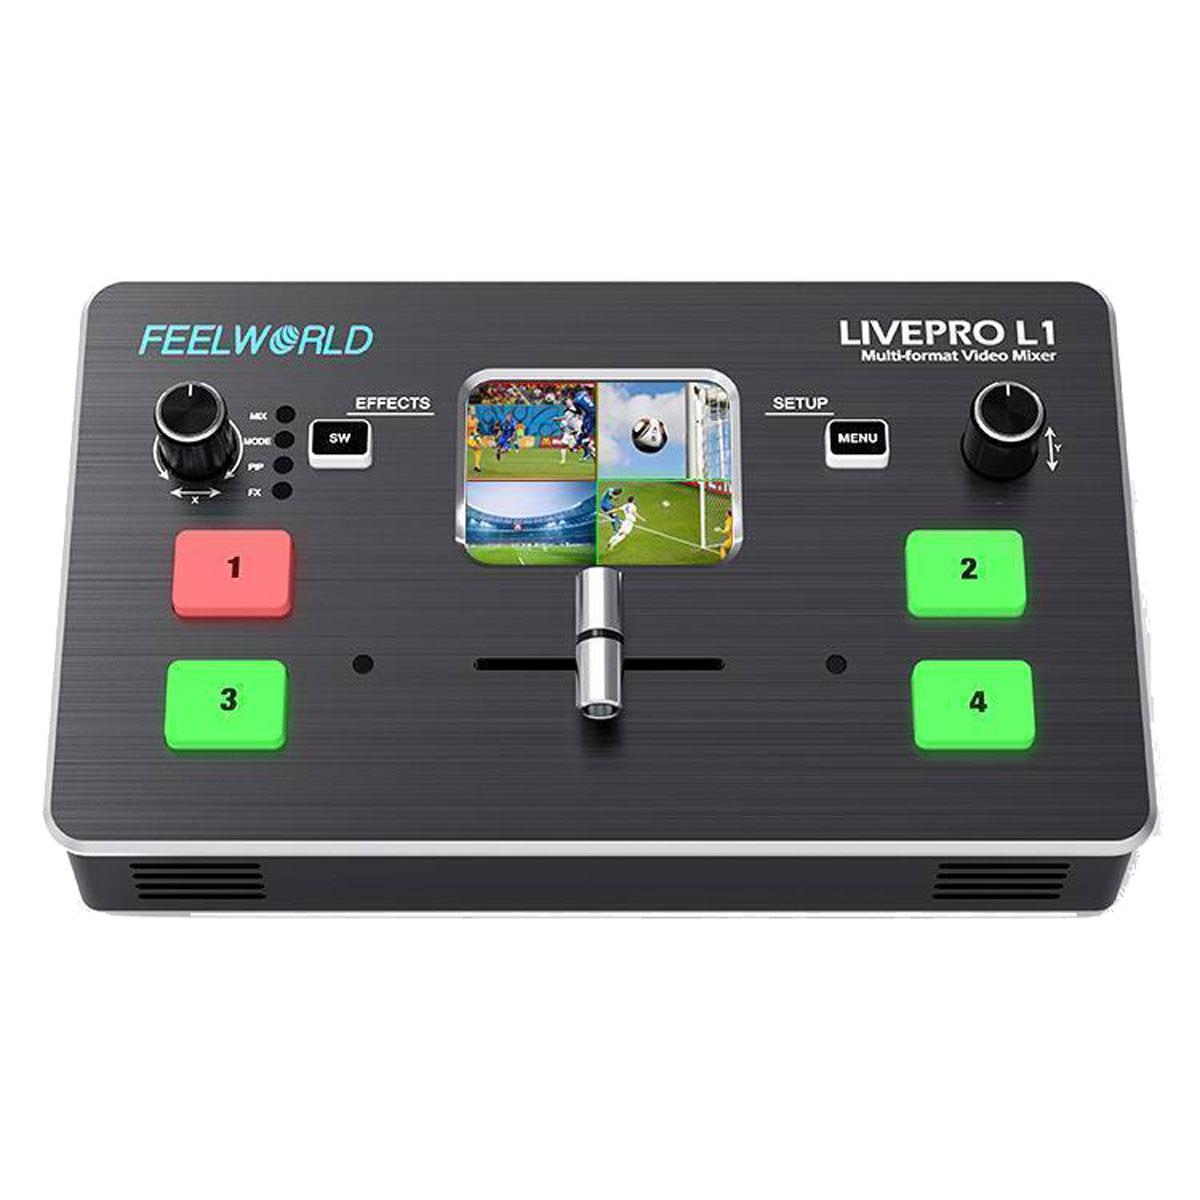 Image of Feelworld LIVEPRO L1 Multi-Format Video Mixer Switcher w/4x HDMI Inputs